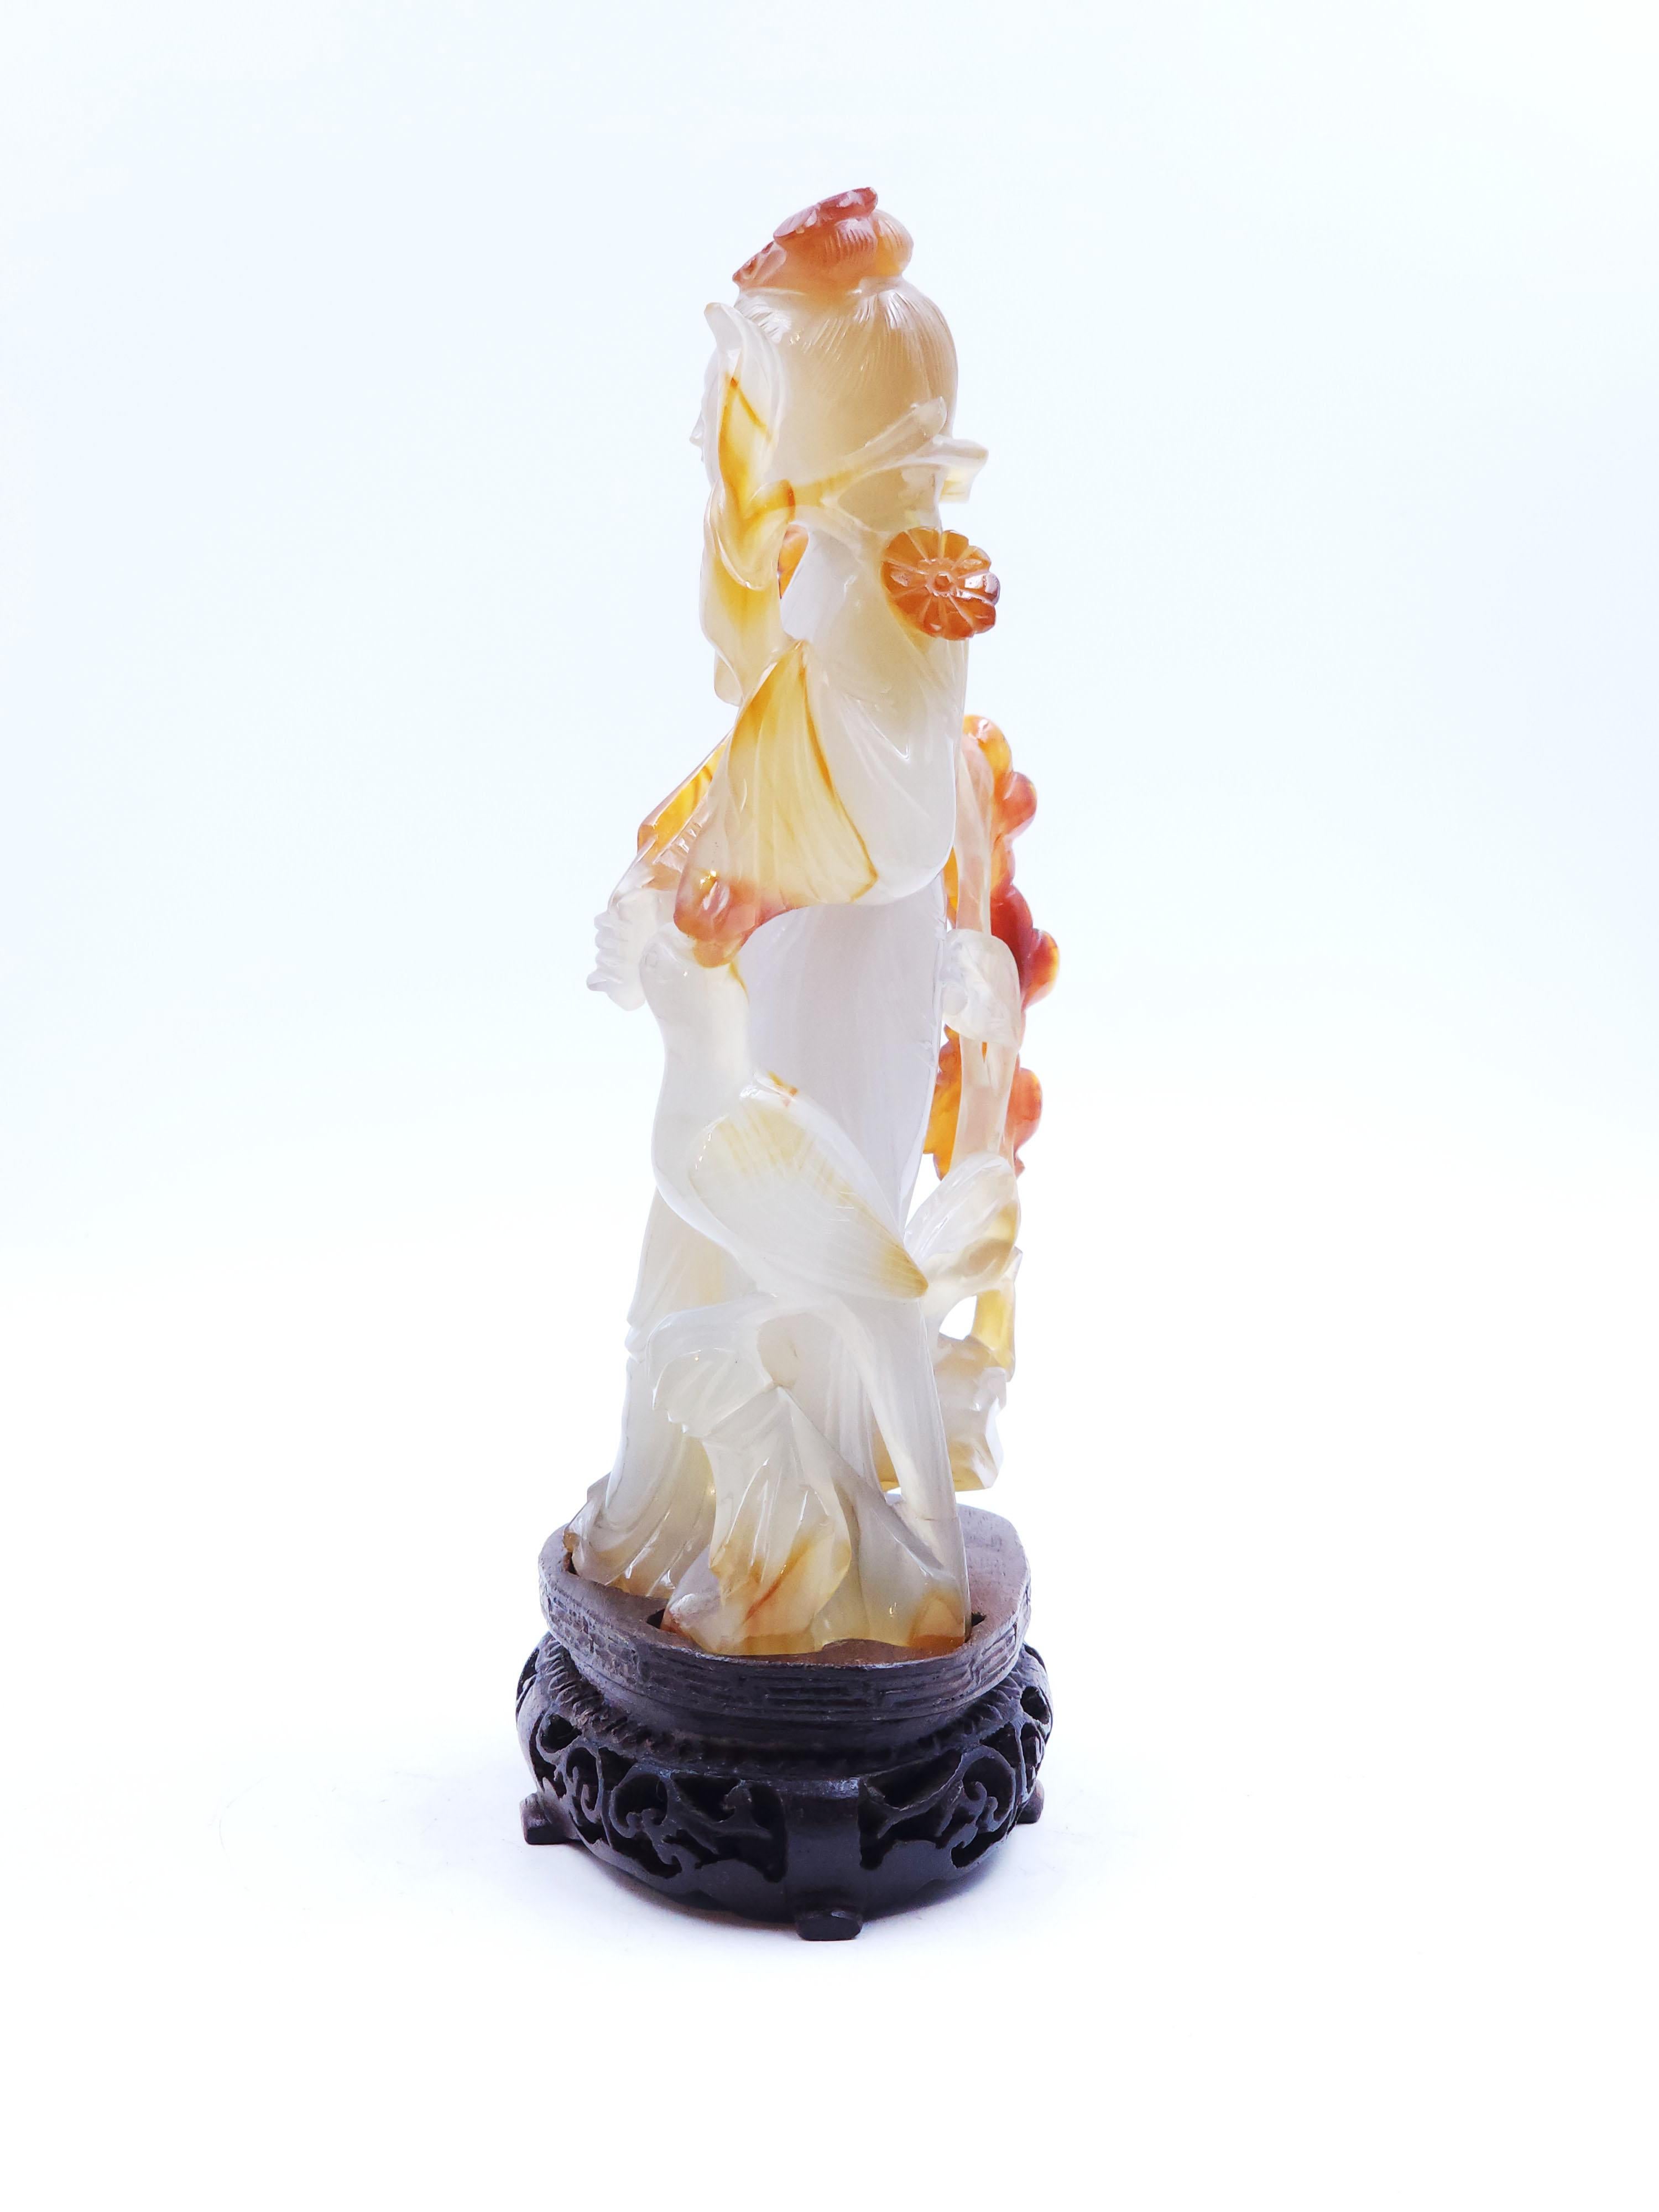 Oriental figure, Qing Dynasty, woman carved in carnelian agate.
Carved carnelian agate figure that represents an oriental woman surrounded by flowers and next to her a long-tailed bird, holding branches in both hands.
Measures:
With base:
Height: 18